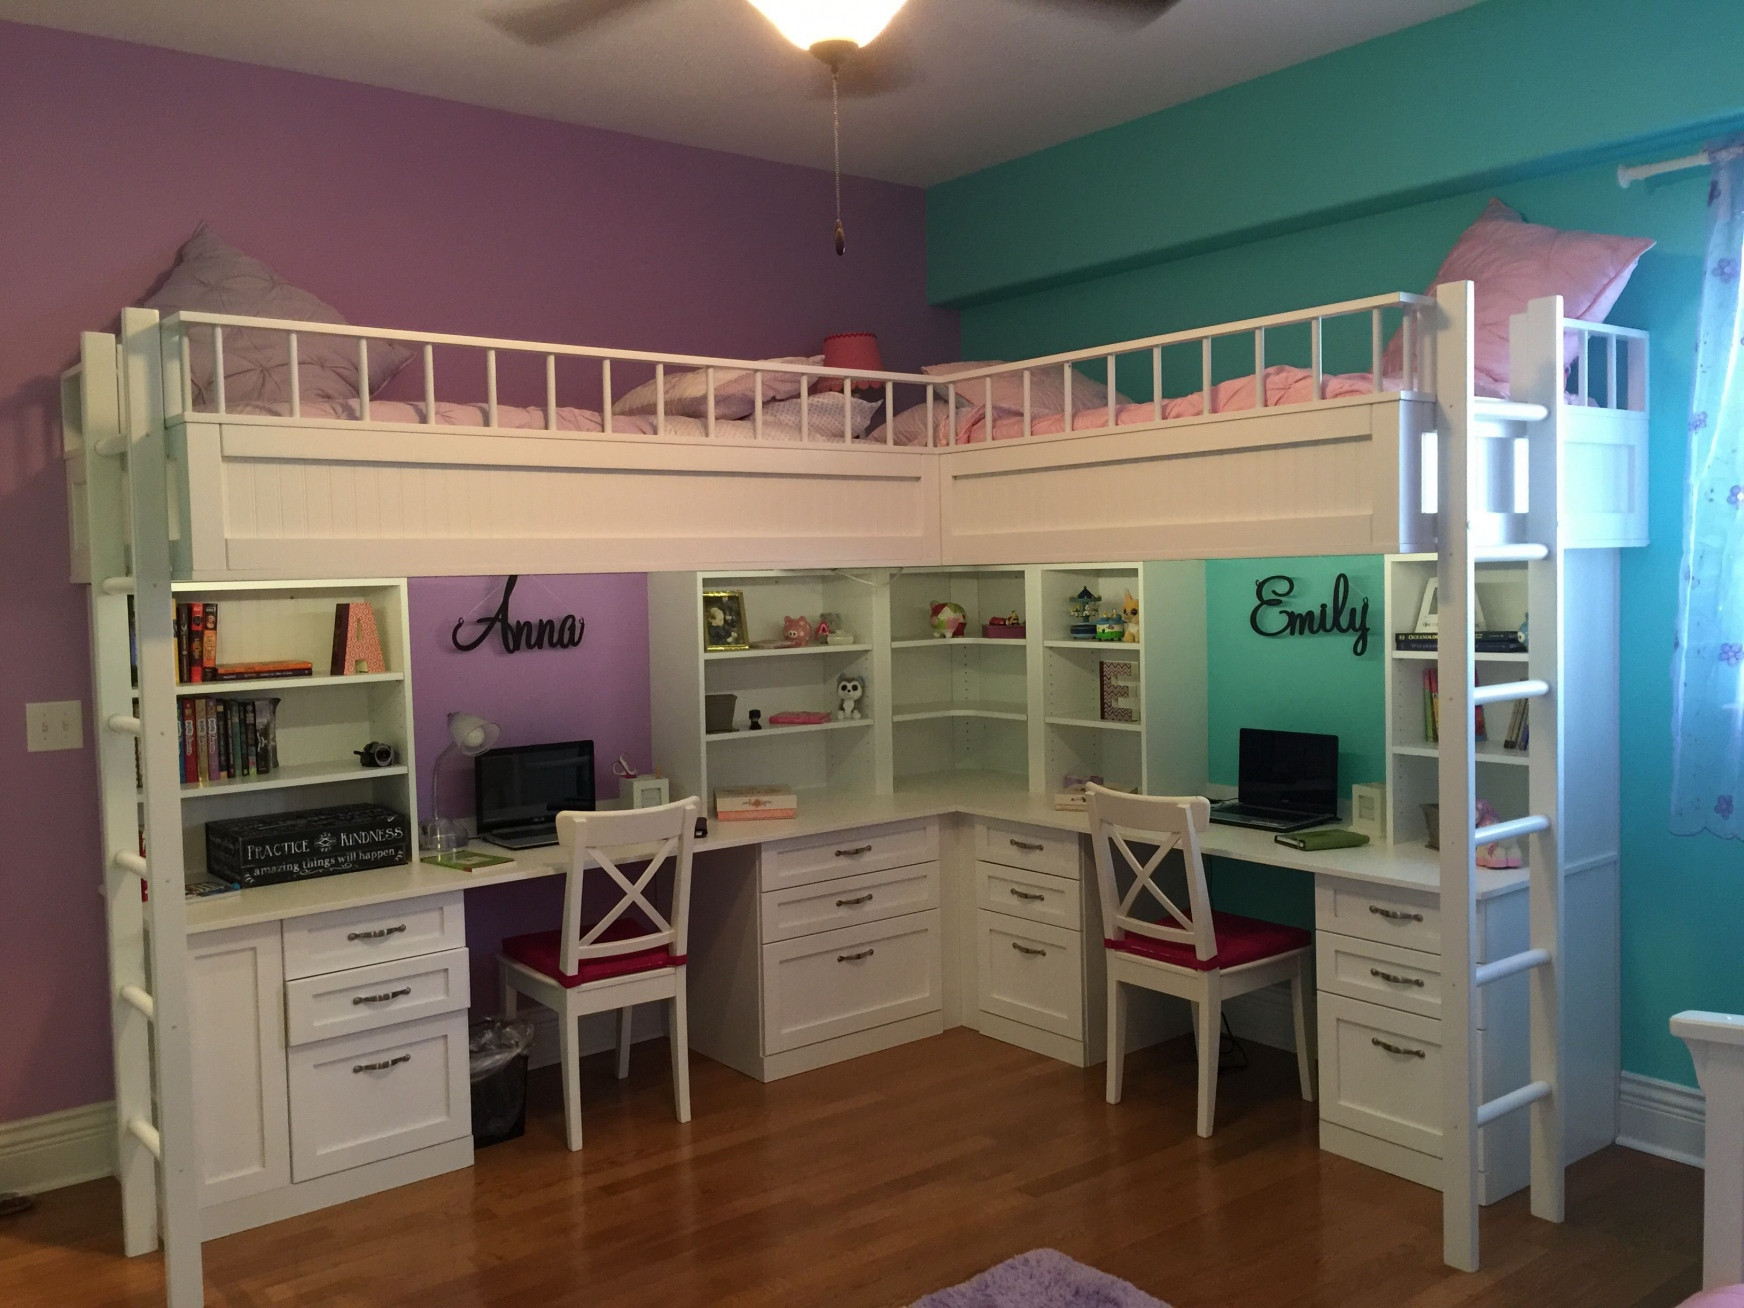 Room To Go Kids Clearance
 2019 Rooms To Go Kids Clearance Bedroom Sets With Storage